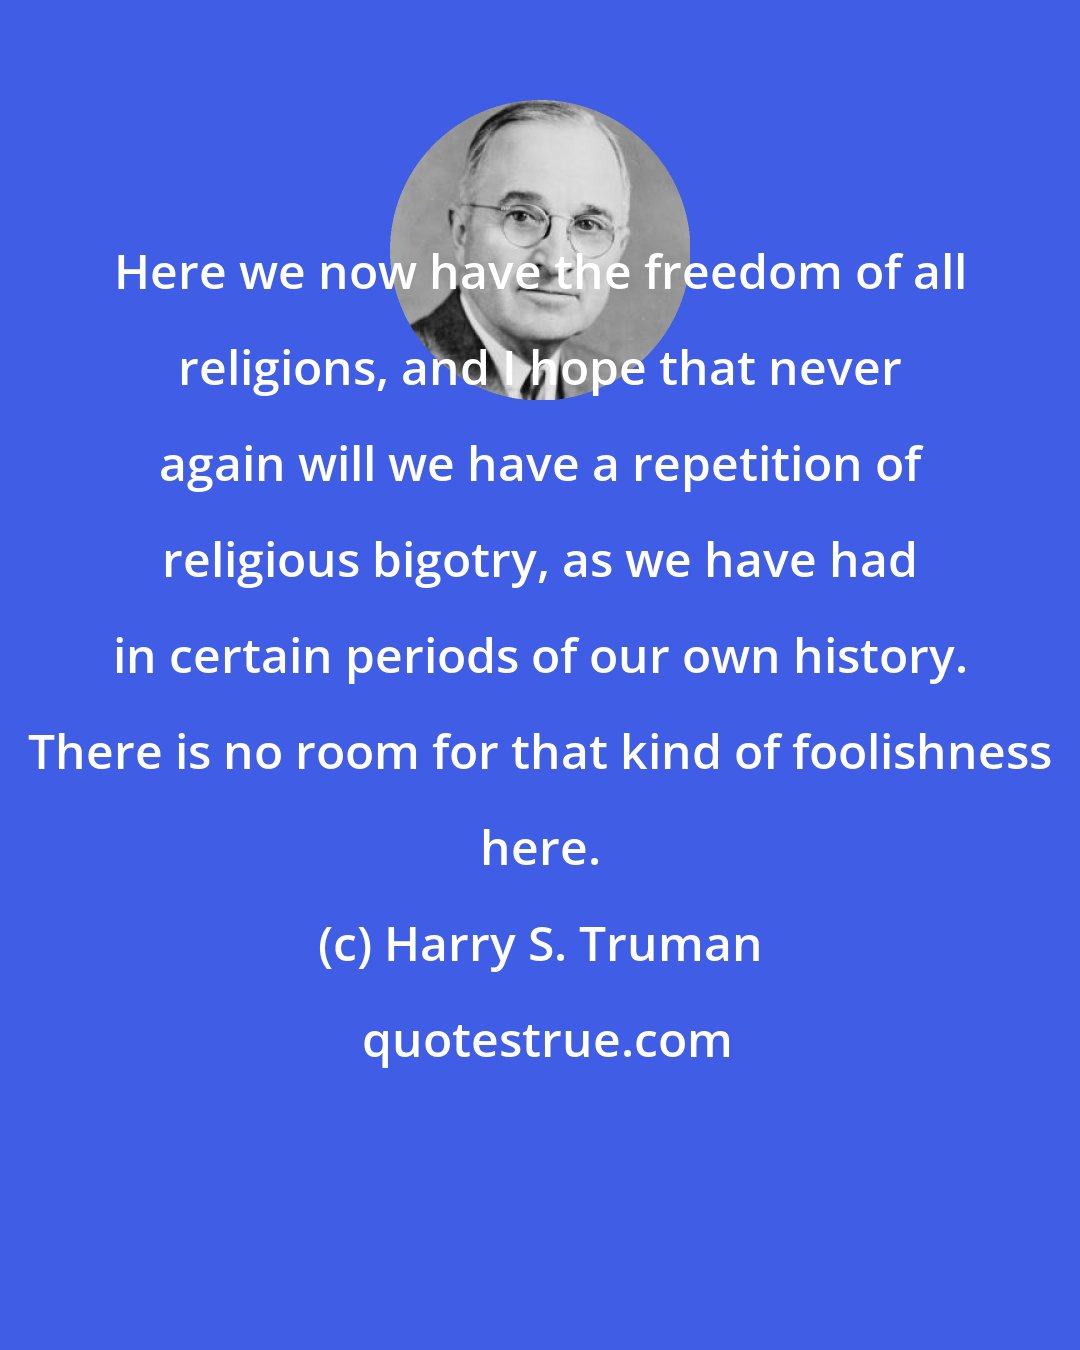 Harry S. Truman: Here we now have the freedom of all religions, and I hope that never again will we have a repetition of religious bigotry, as we have had in certain periods of our own history. There is no room for that kind of foolishness here.